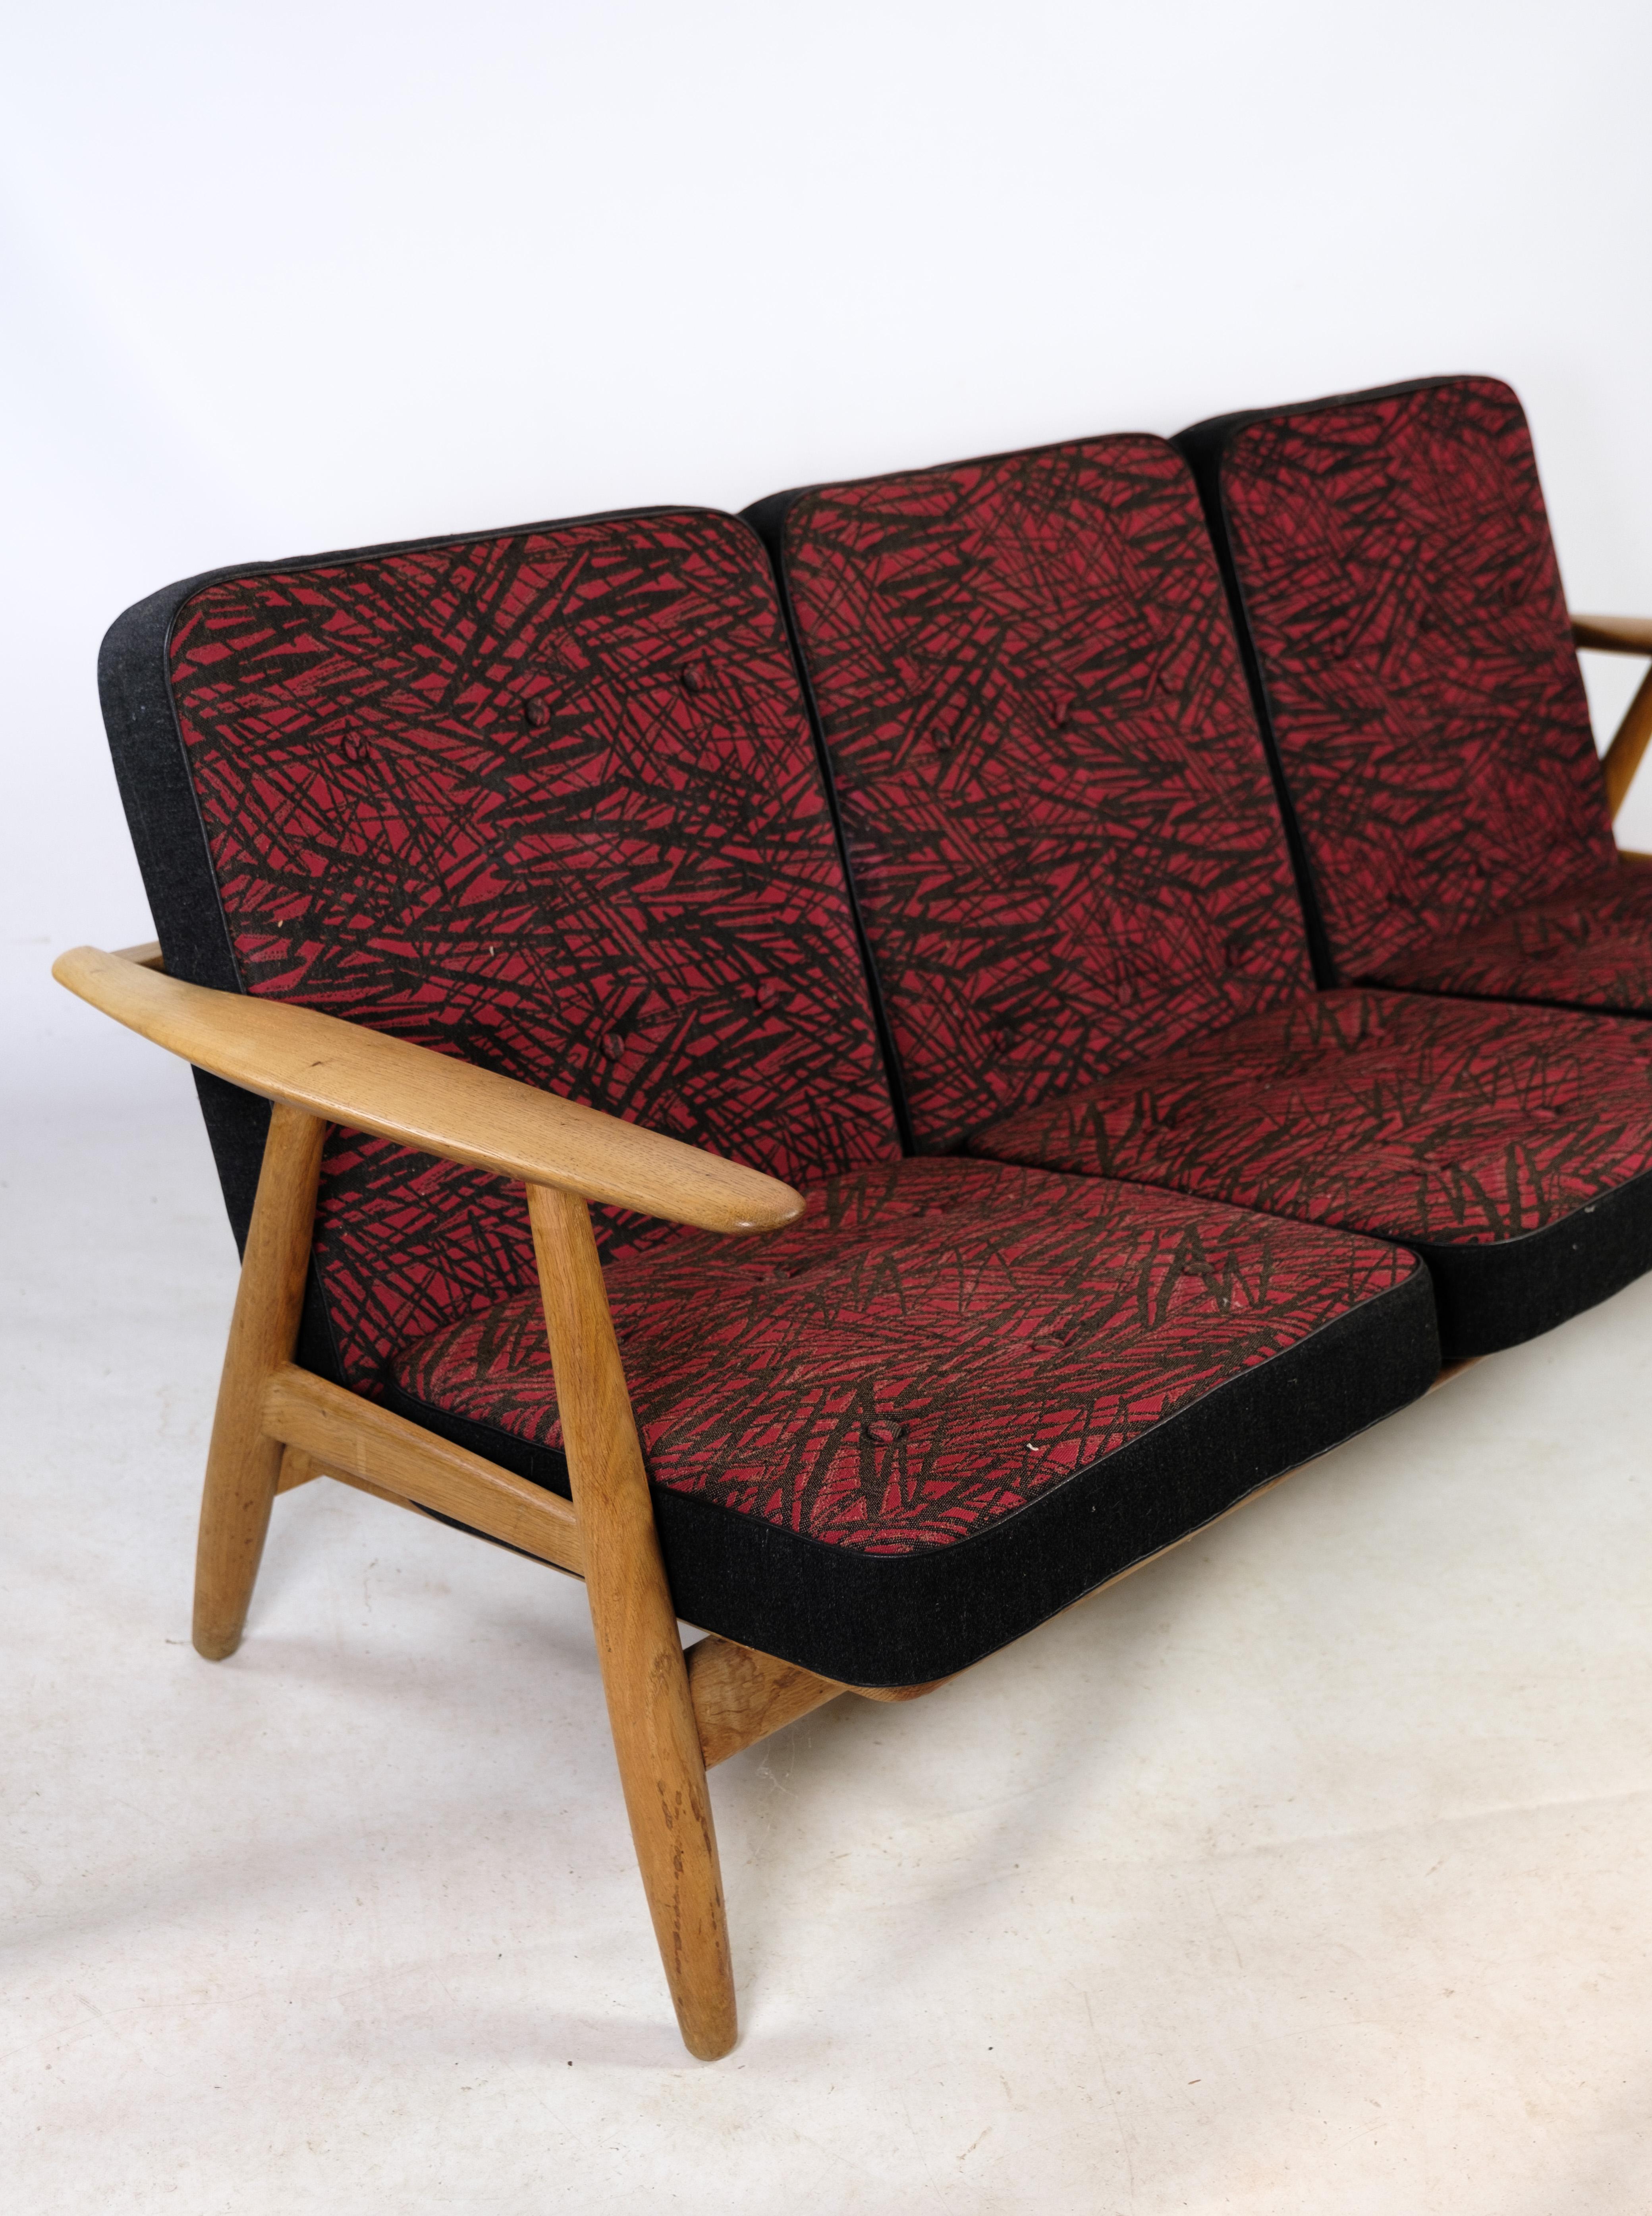 3-person sofa, Model GE 240/ 3, designed by Hans J. Wegner in oak with black and reddish decorated cushions from the 1960s.
Dimensions in cm: H:70 W:175 D:55.